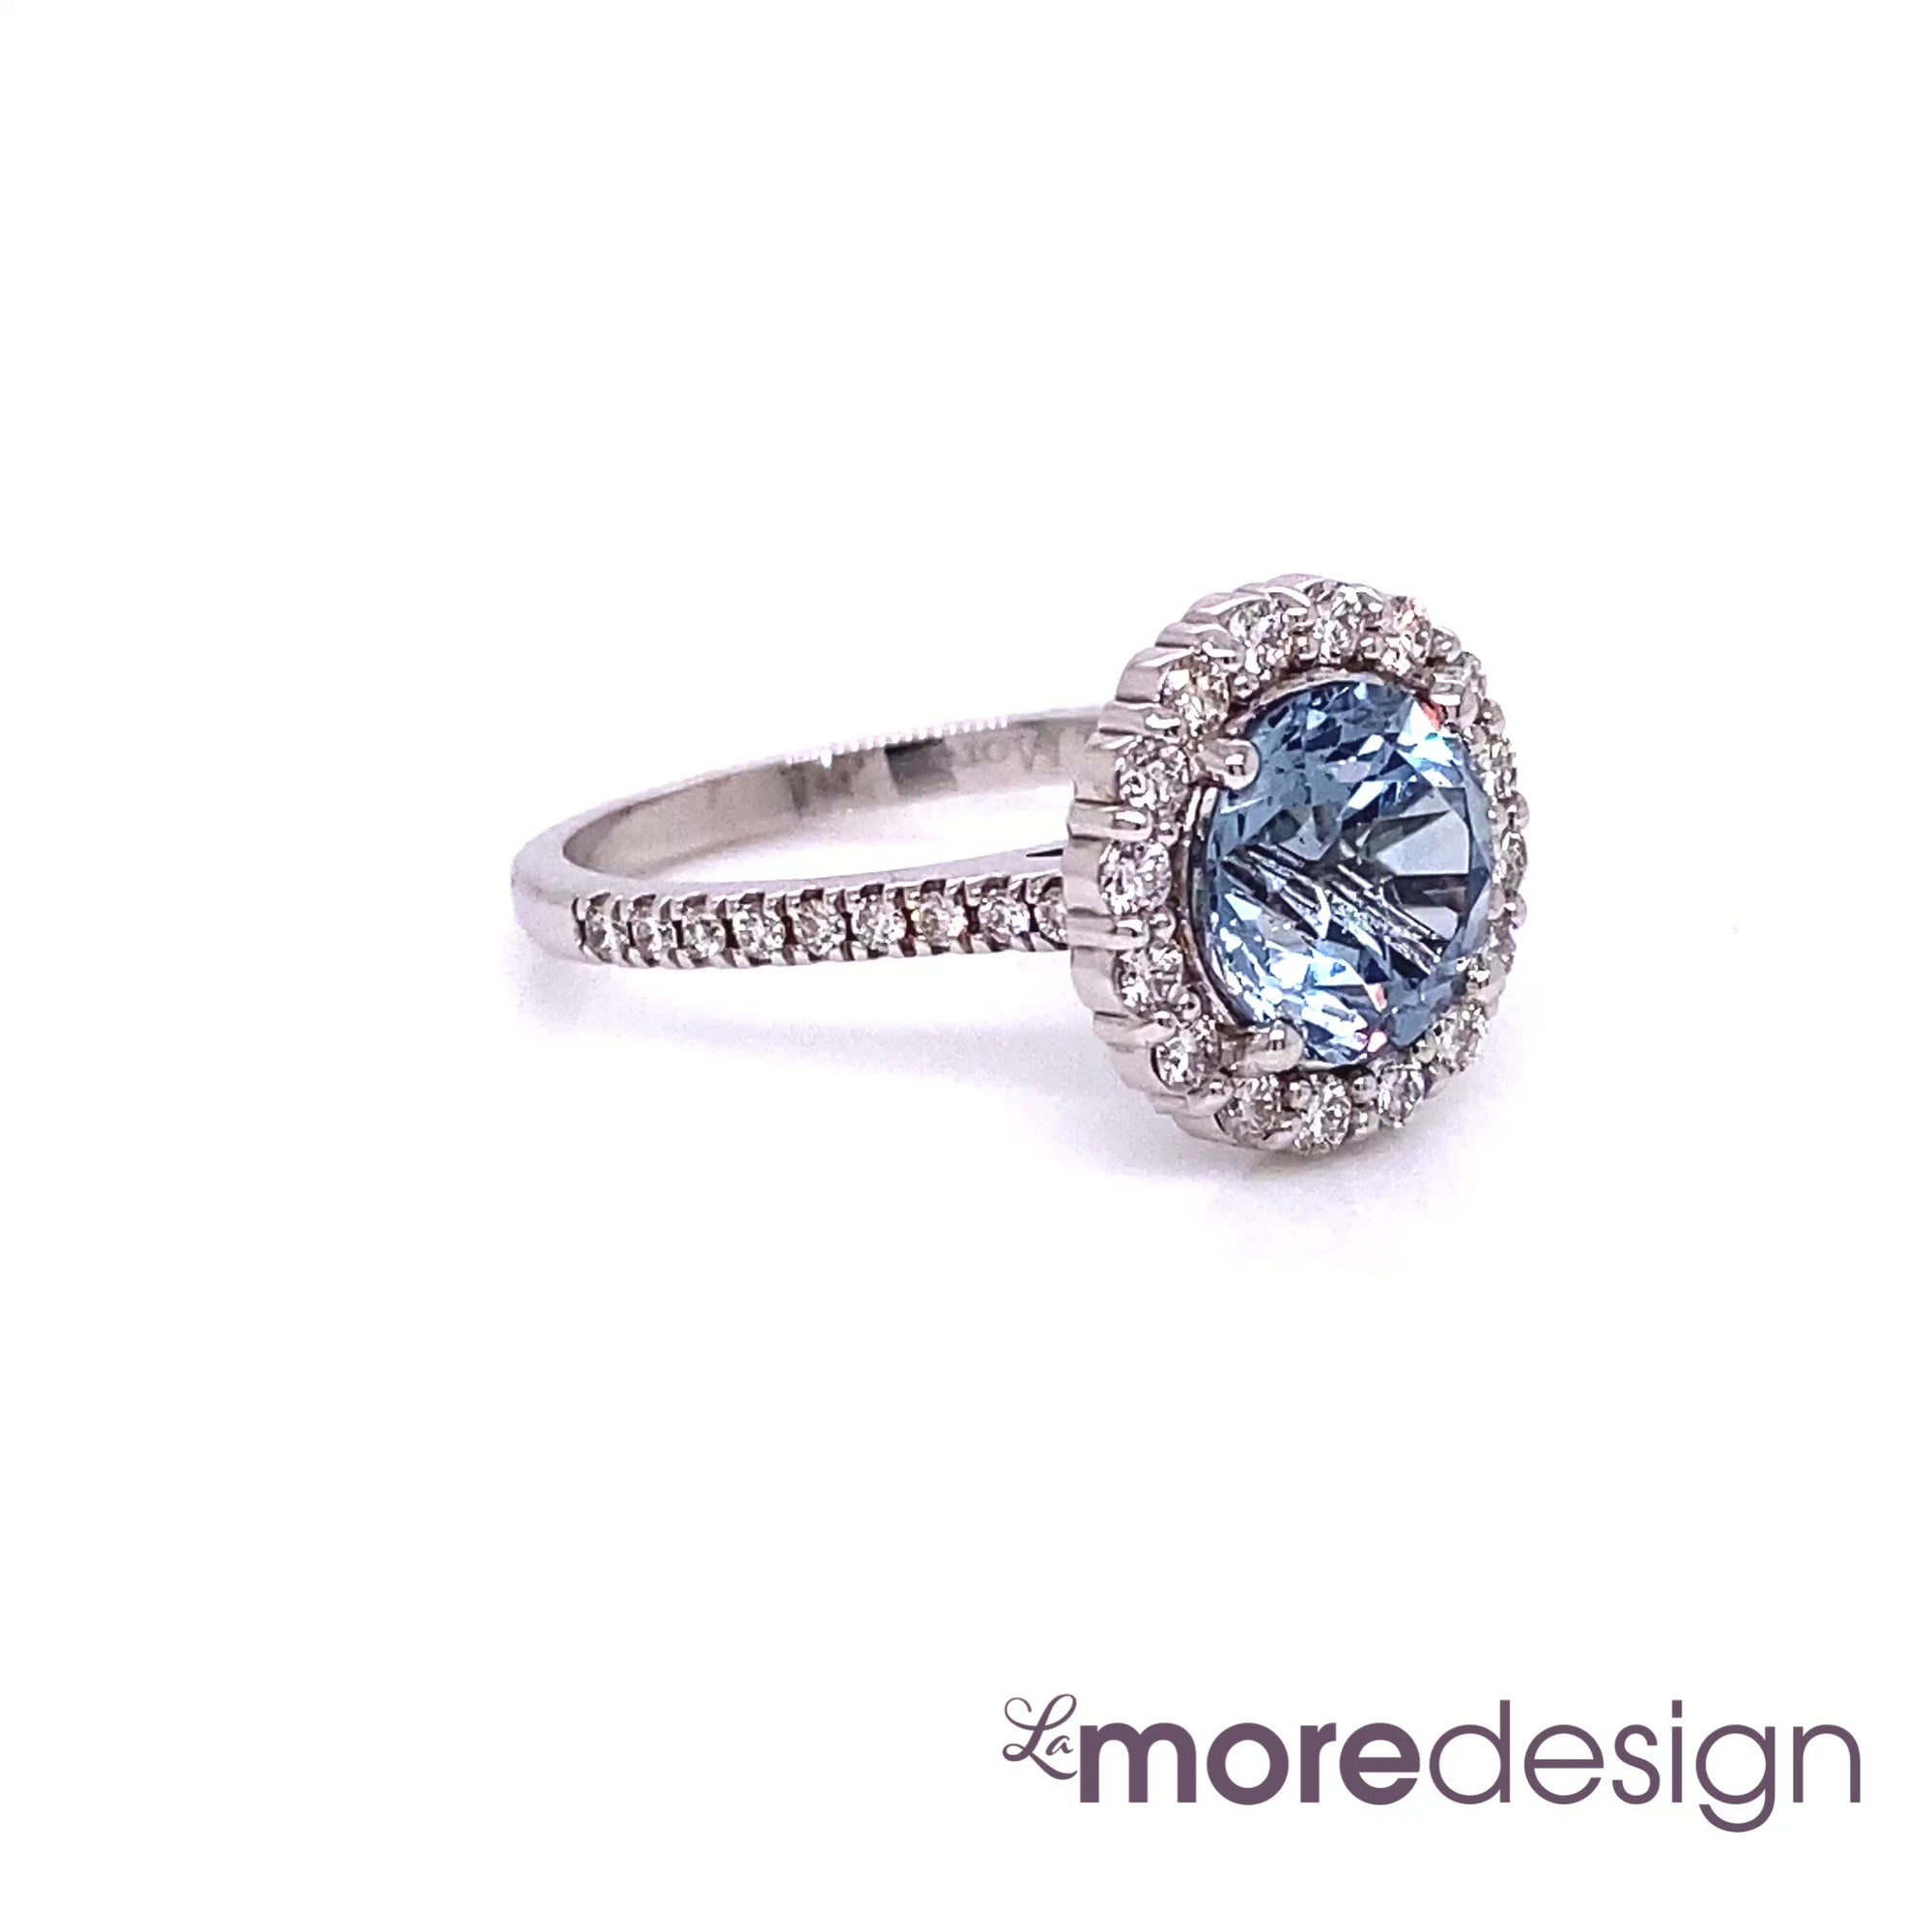 This exquisite sapphire ring features a large 2.84 carat round cut natural aqua blue sapphire set in a 18k white gold halo diamond ring setting and for a stunning effect, the ring shank is finished with pave diamonds ~ the total gemstone and diamond weight of the whole ring is 3.44 ct.tw.  This timelessly beautiful sapphire engagement ring will guarantee a big smile on your future bride's face! All our wedding bands can pair beautifully with this gorgeous halo diamond sapphire ring!